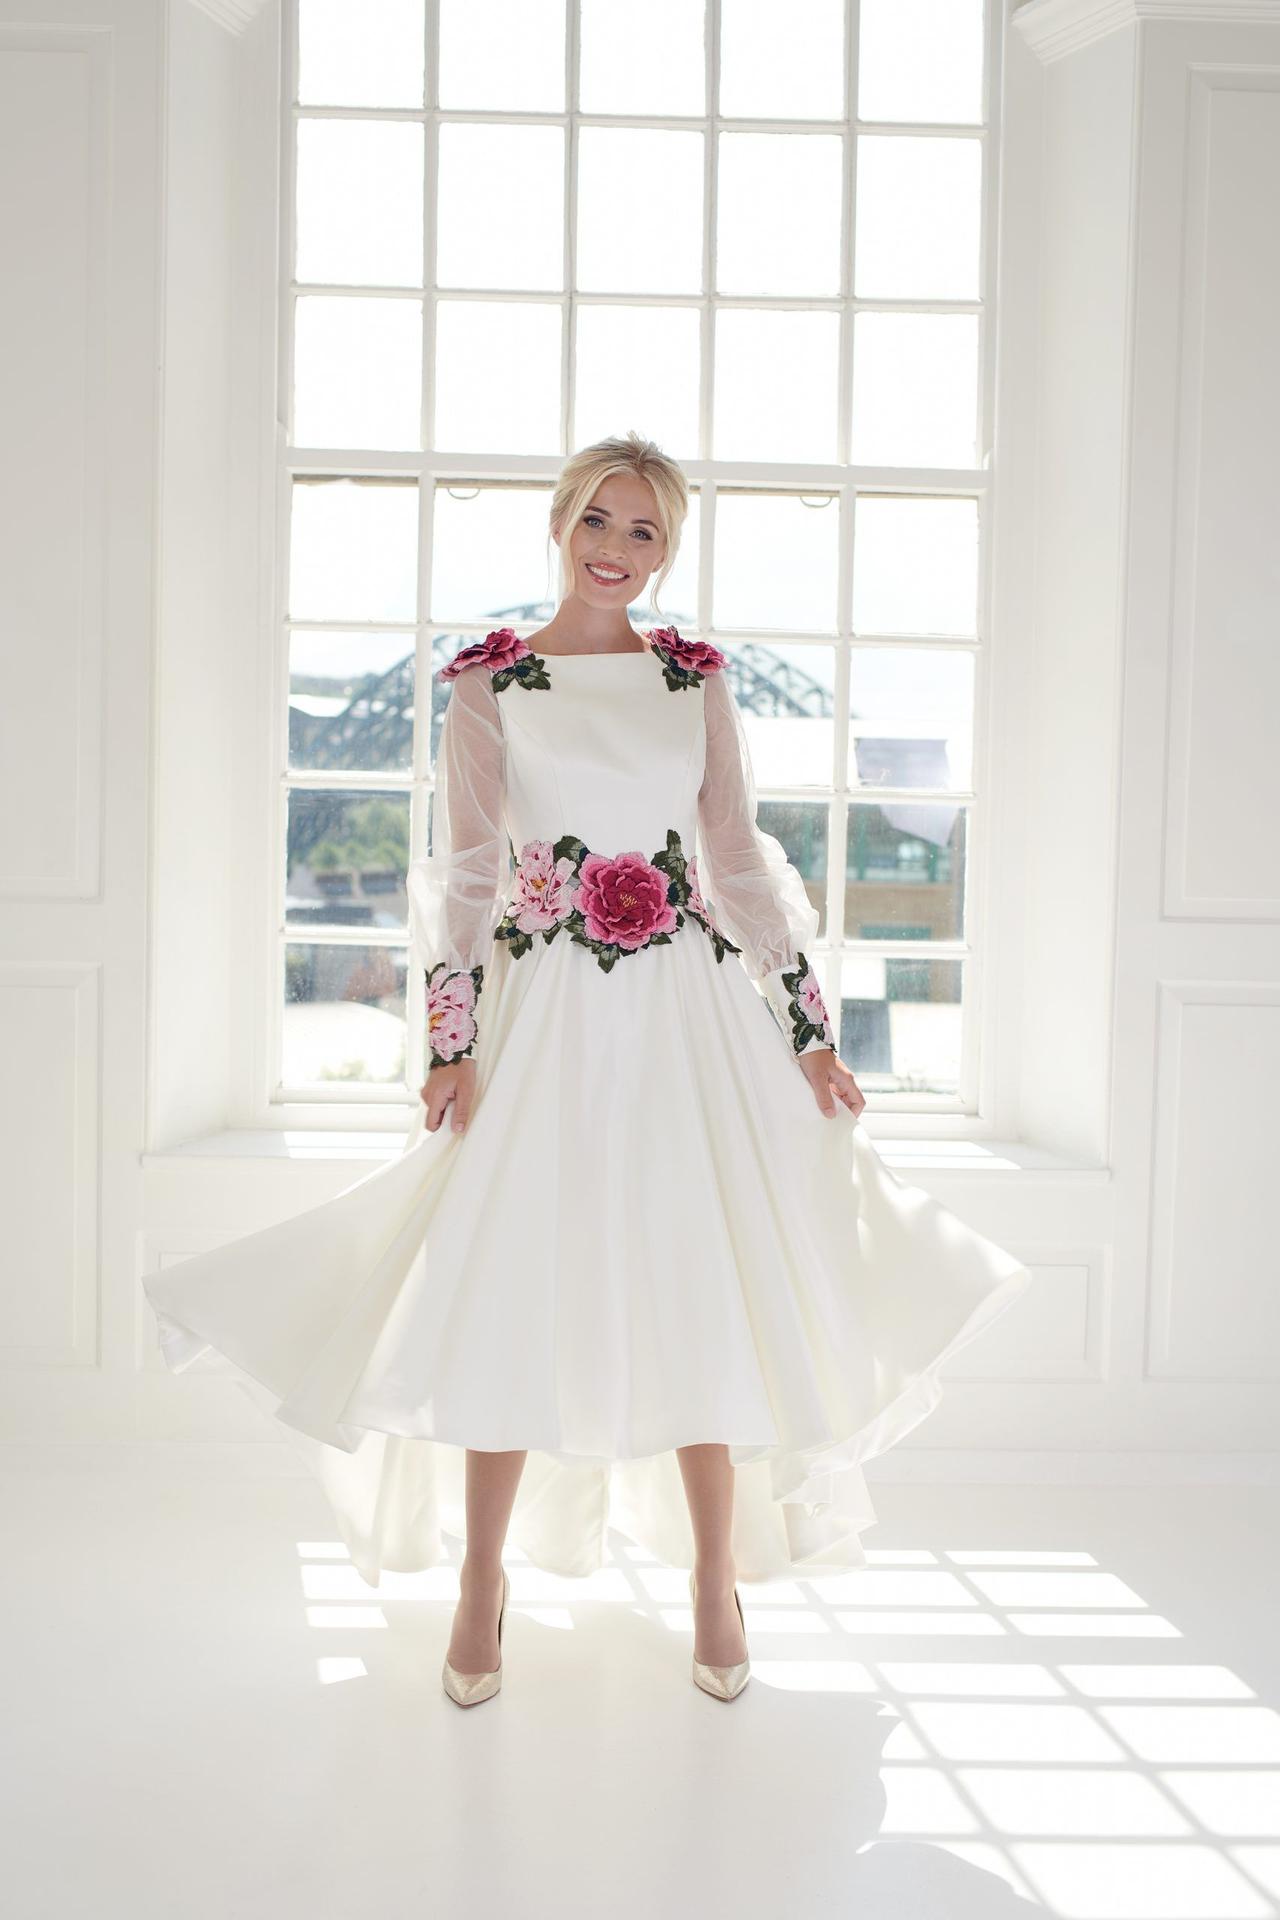 Model wearing a sheer long sleeved wedding dress with pink roses